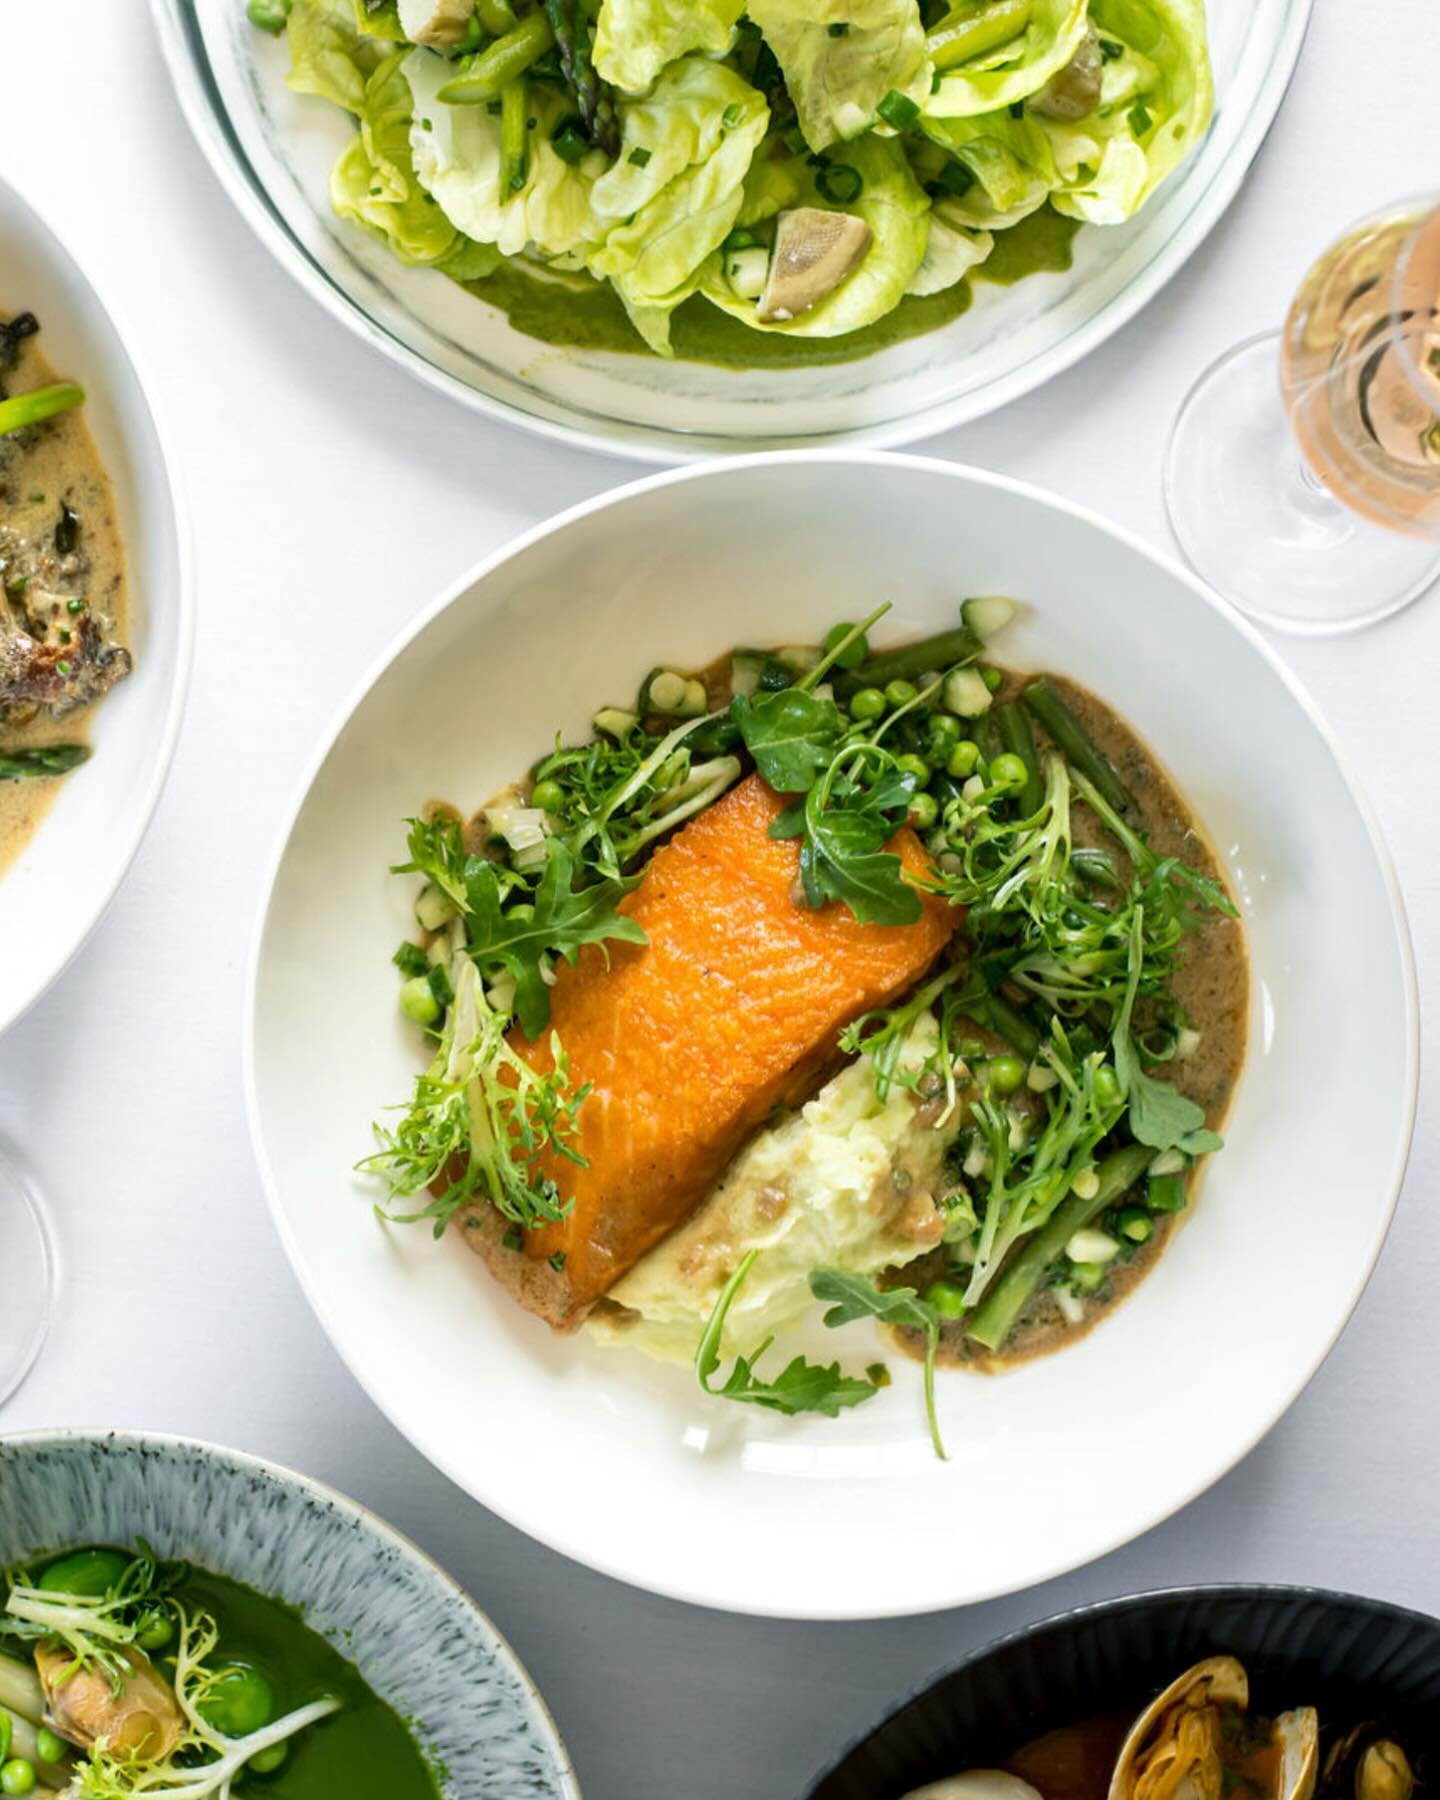 Spring is here and we&rsquo;re in it for the pops of freshness from our salmon and ravigote to octopus with fresh chickpea and ramp hummus. Come enjoy the experience!